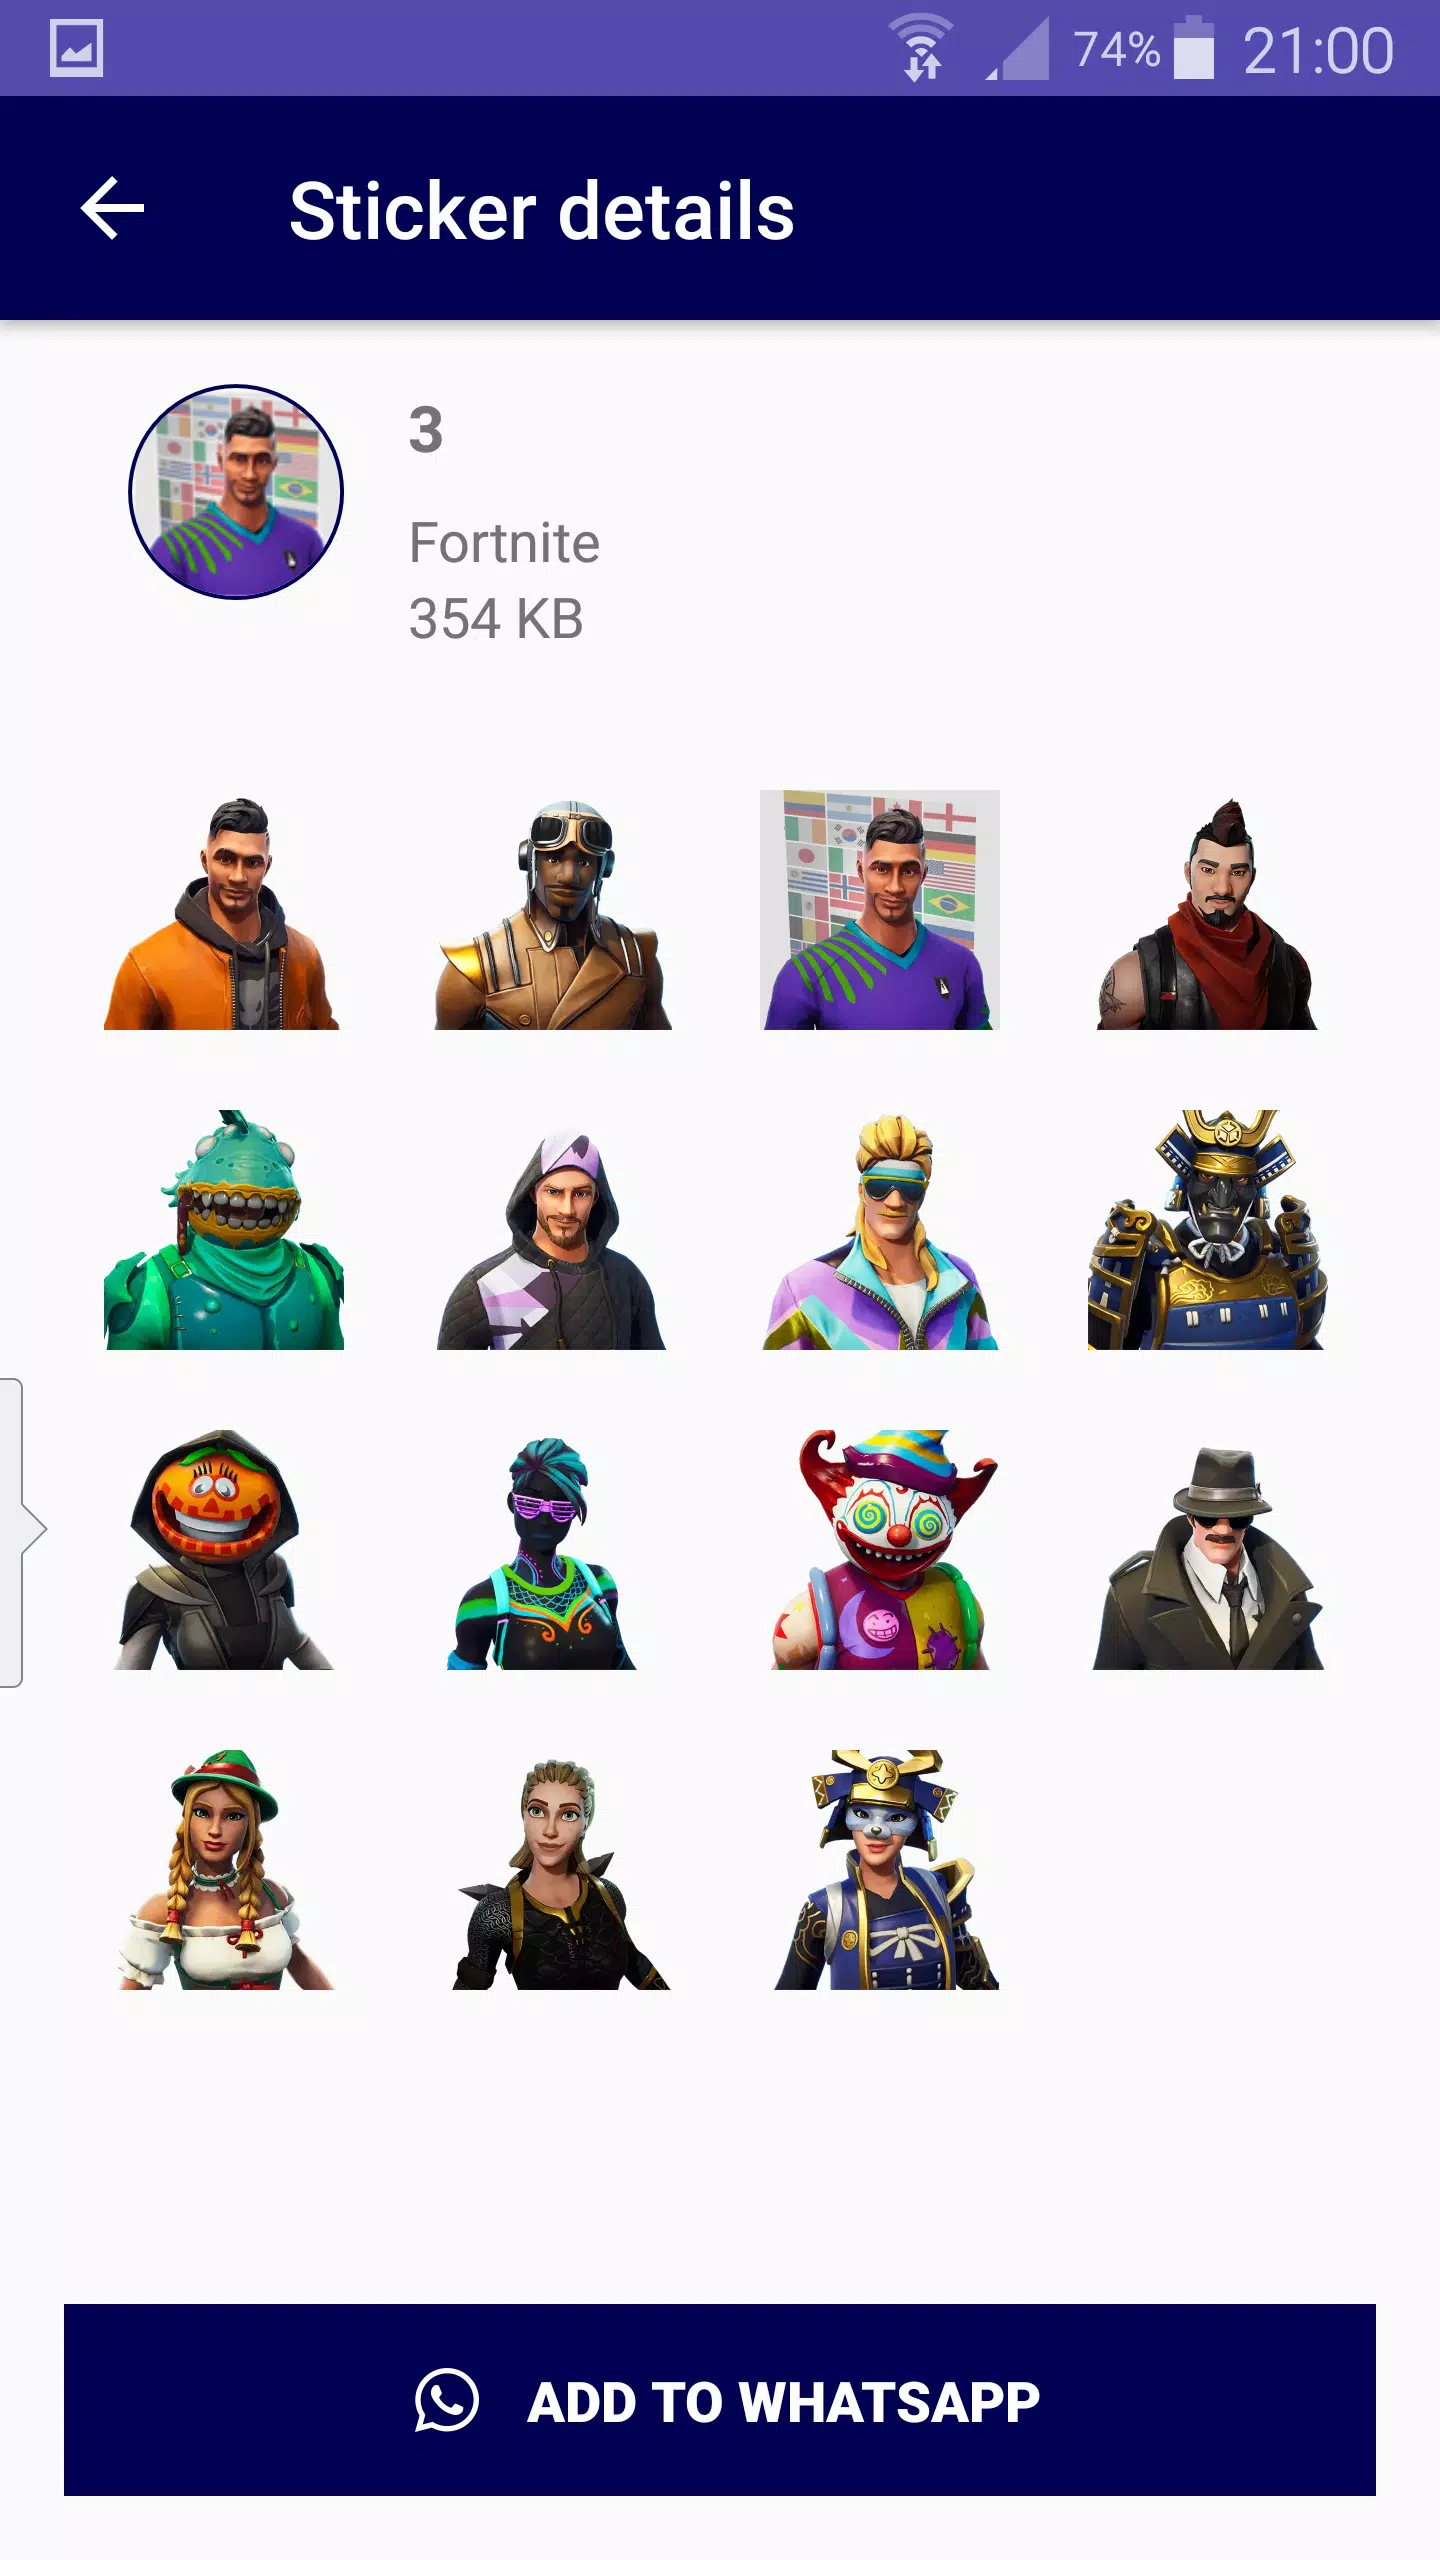 zelf Dhr Gematigd WAStickerApps For Fortnite - Stickers For WhatsApp APK pour Android  Télécharger